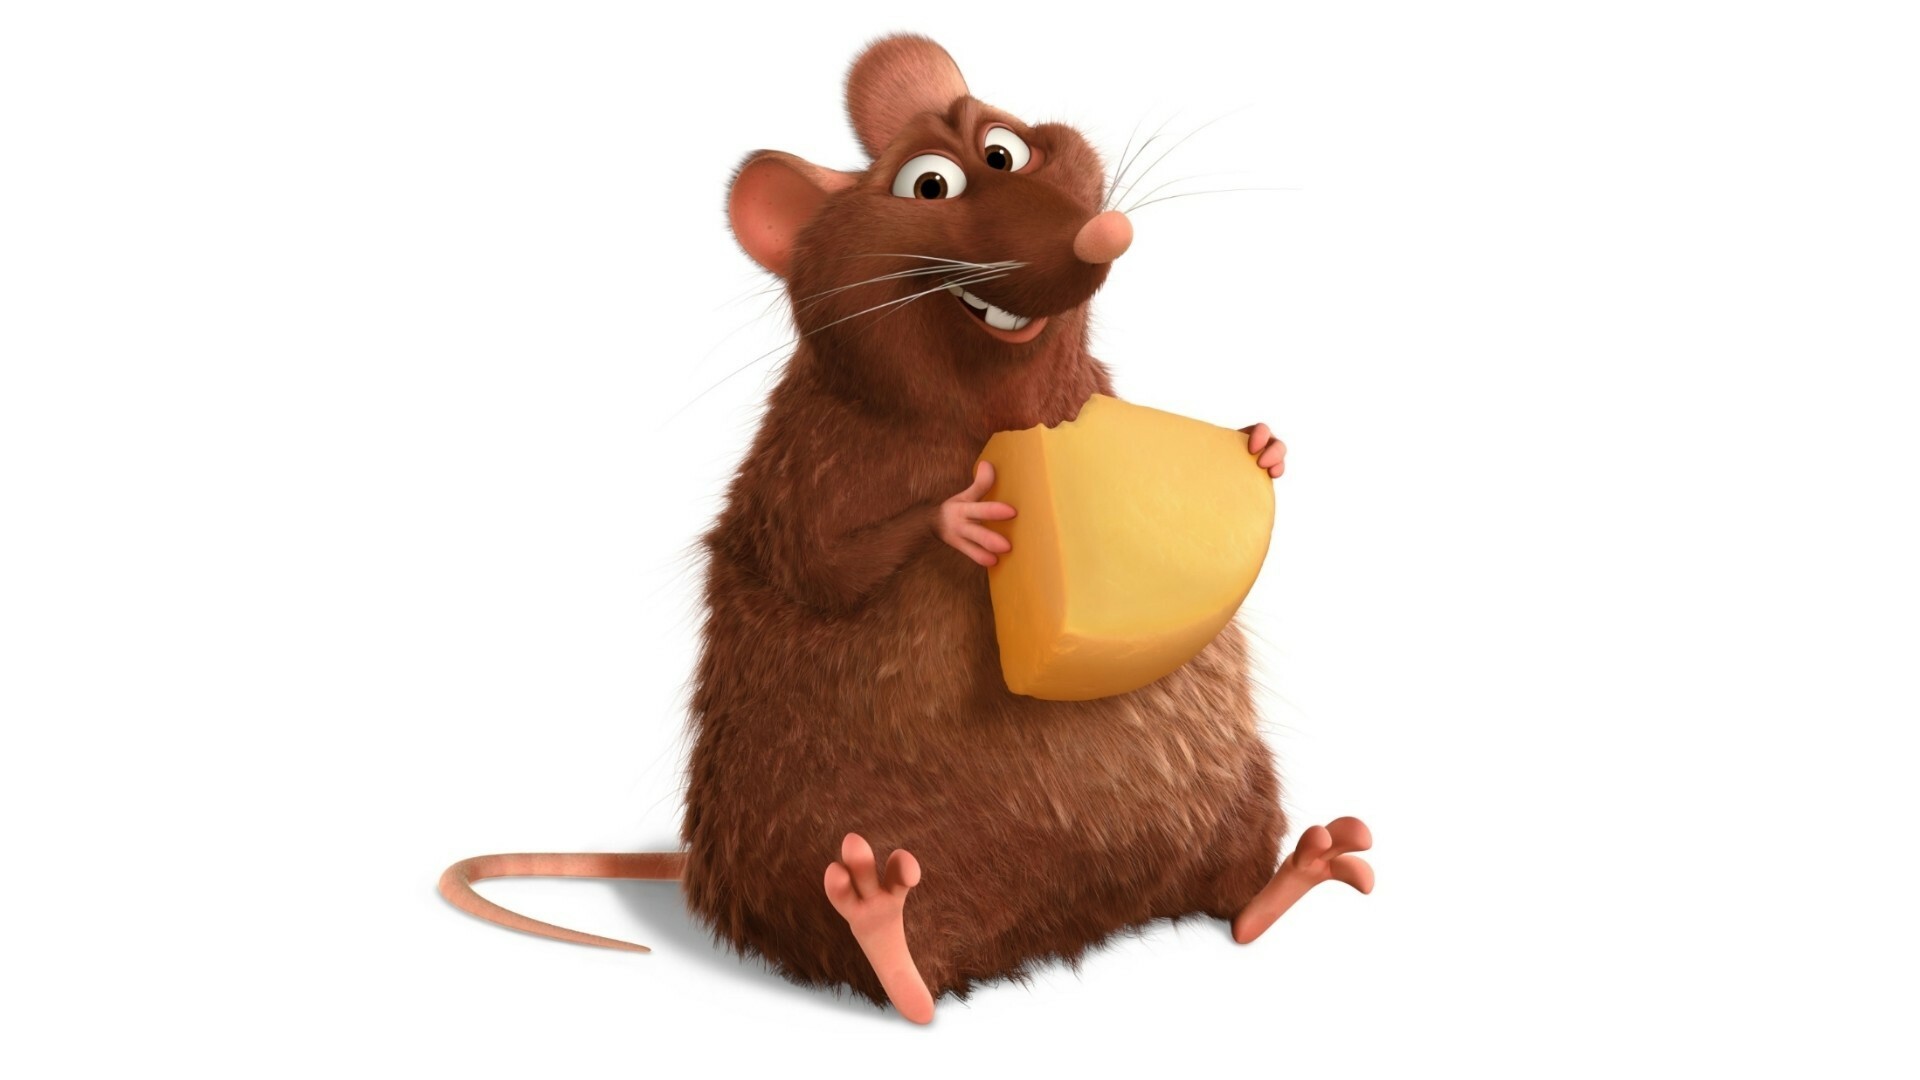 Ratatouille: Emile, Remy's older brother, Rat. 1920x1080 Full HD Background.